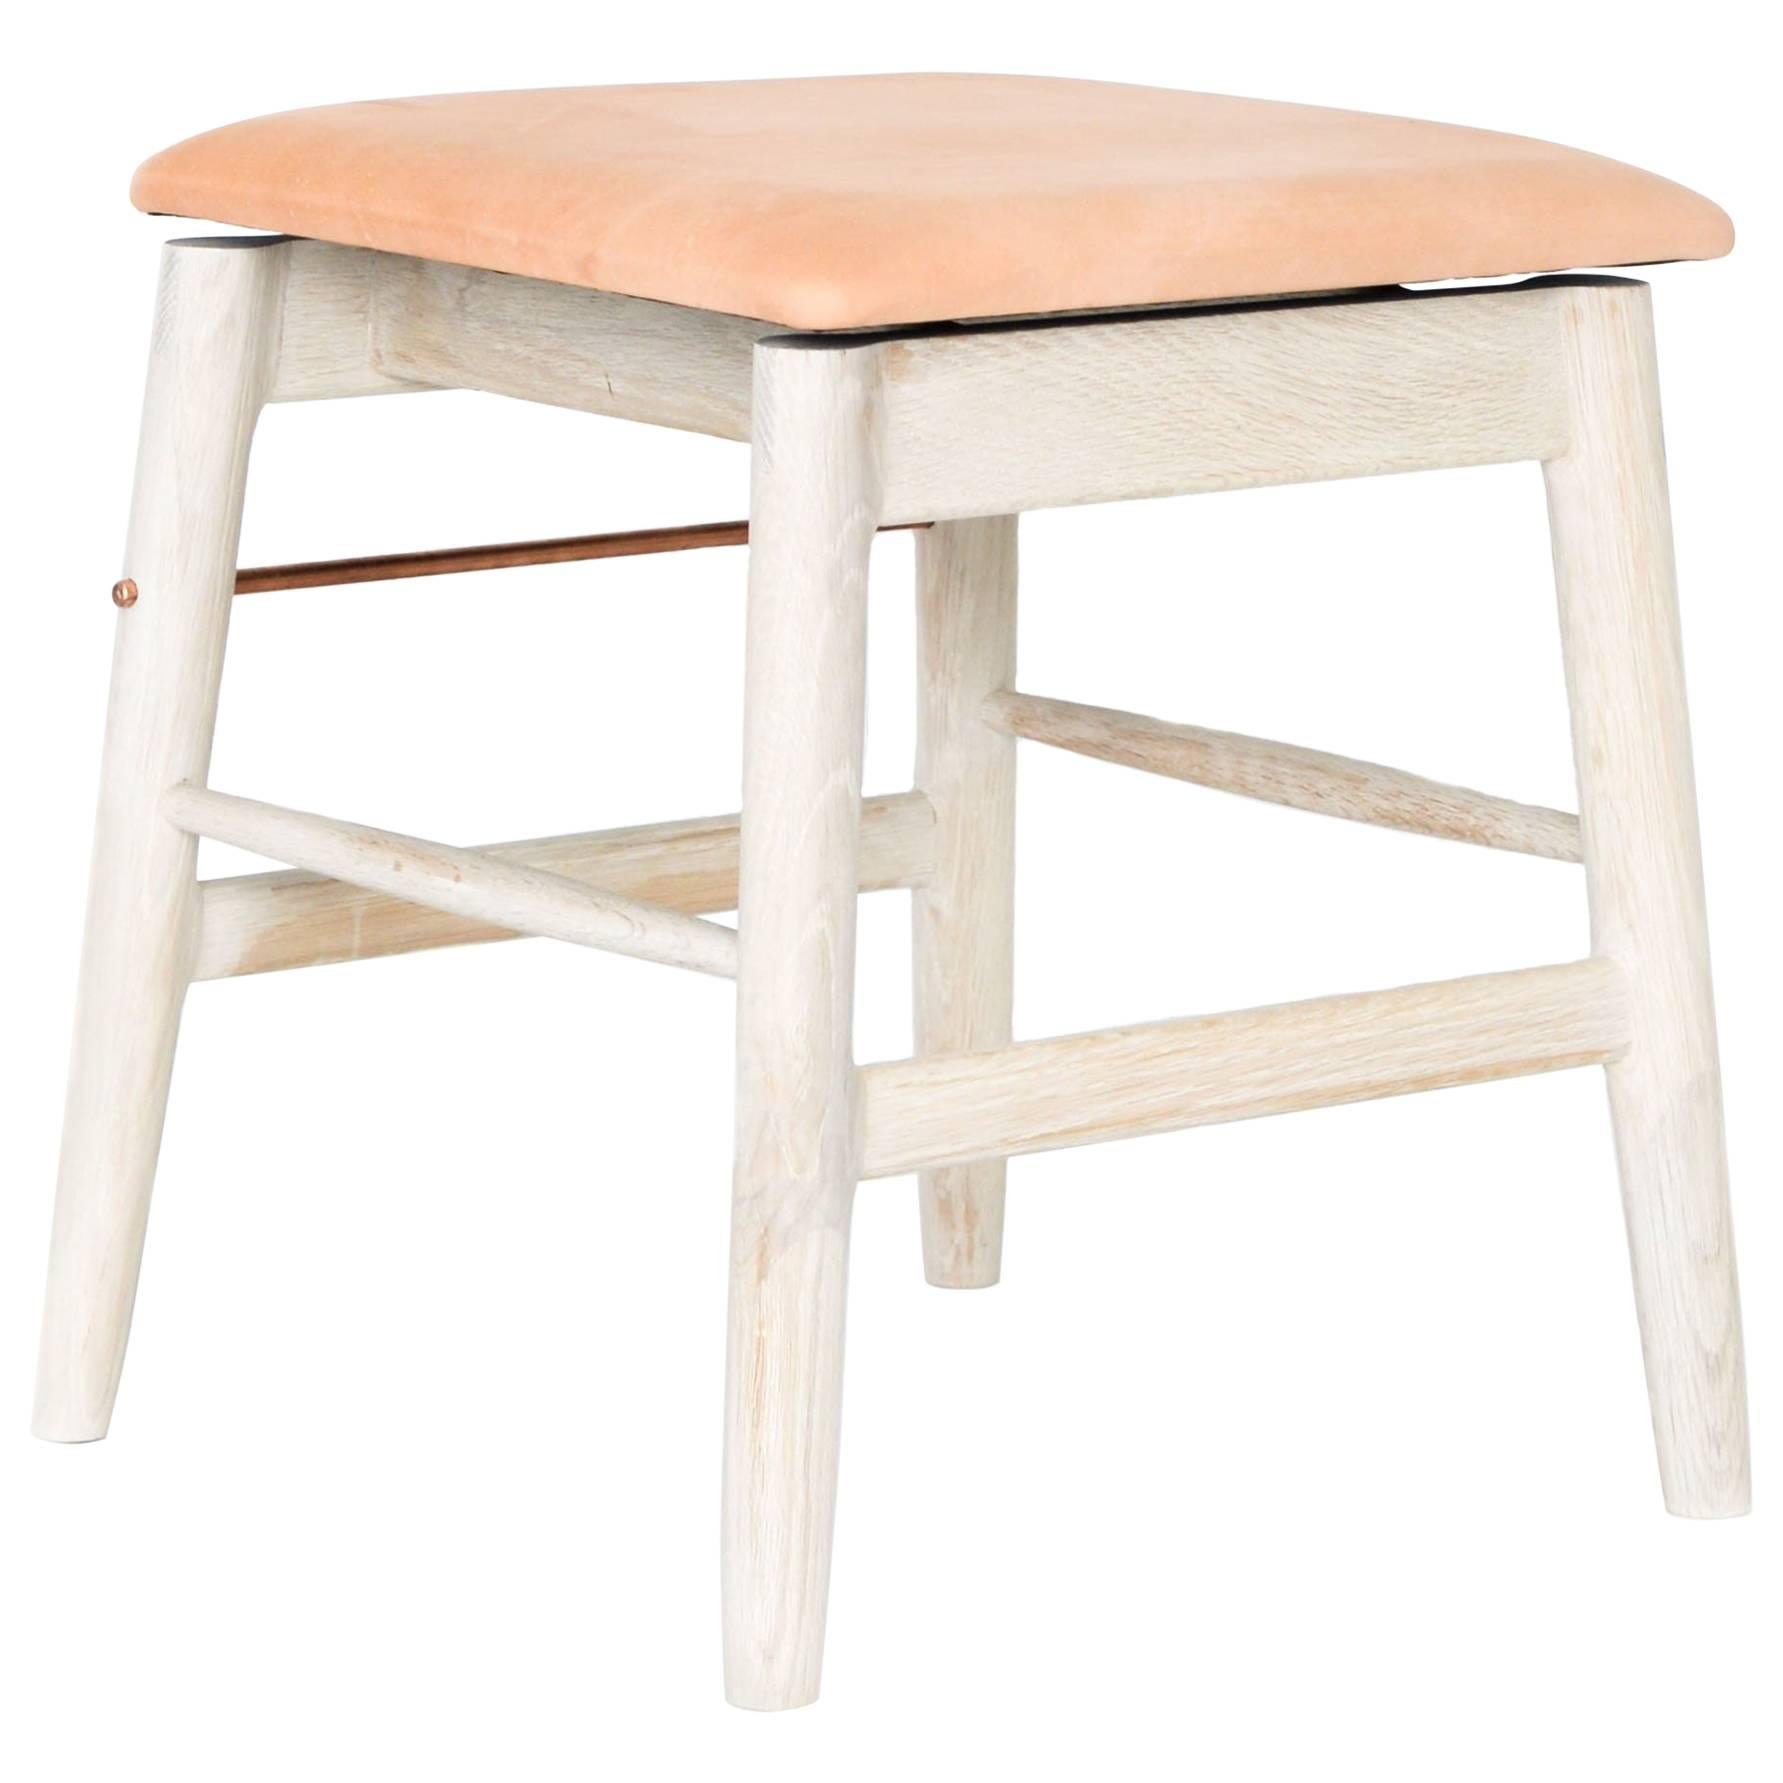 White Oak, Veg Tan and Copper Wood Low Stool For Sale